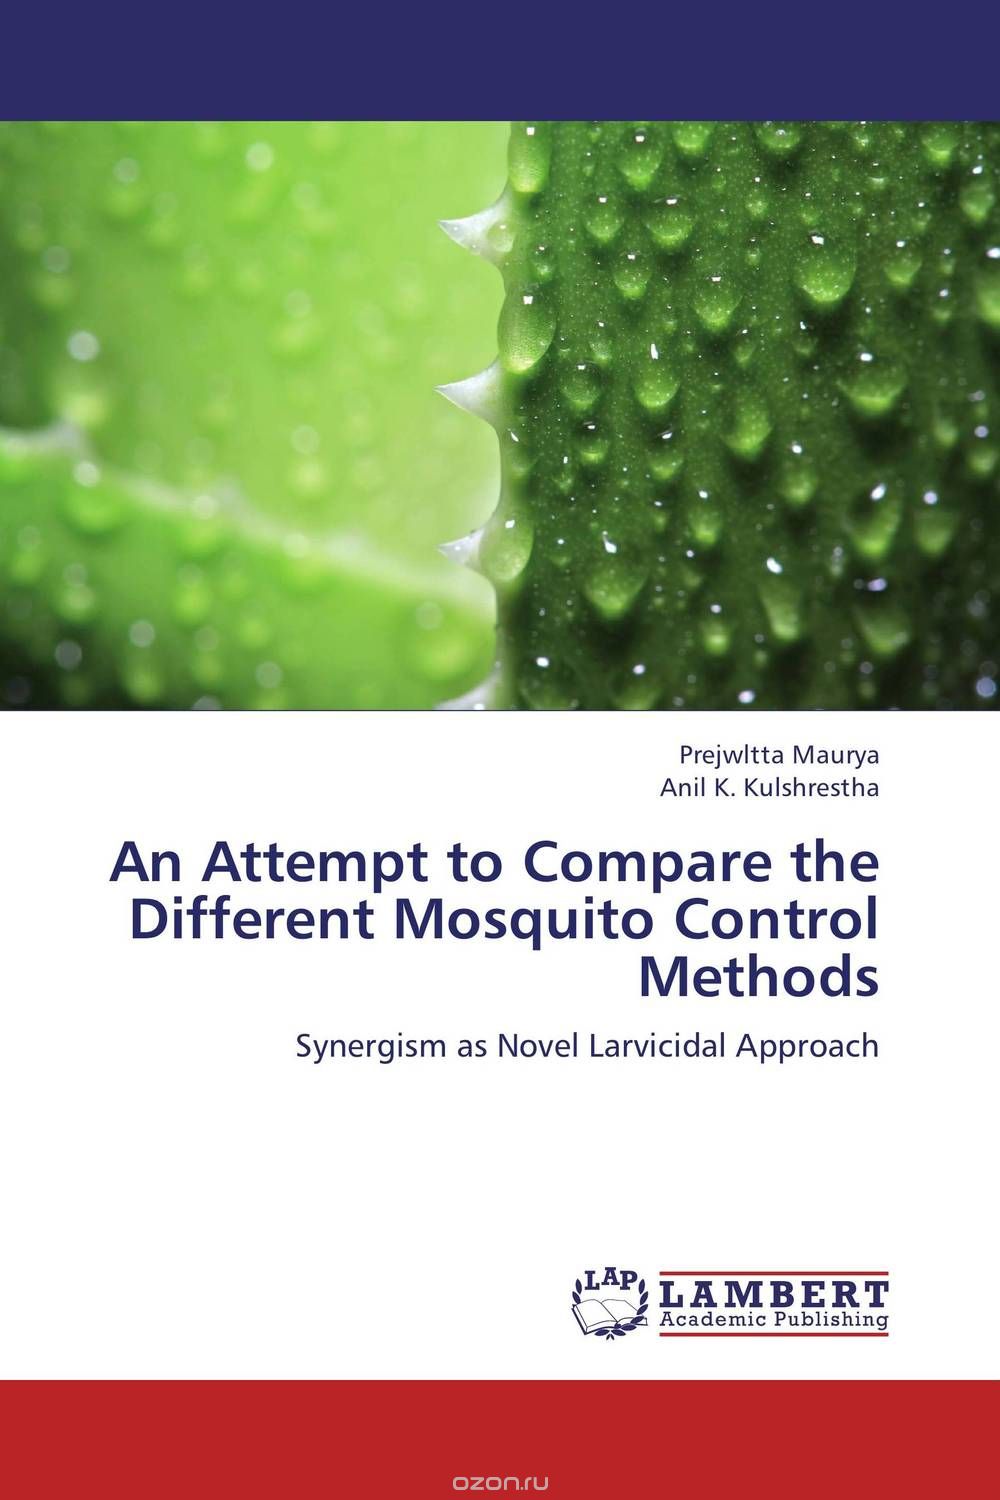 Скачать книгу "An Attempt to Compare the Different Mosquito Control Methods"